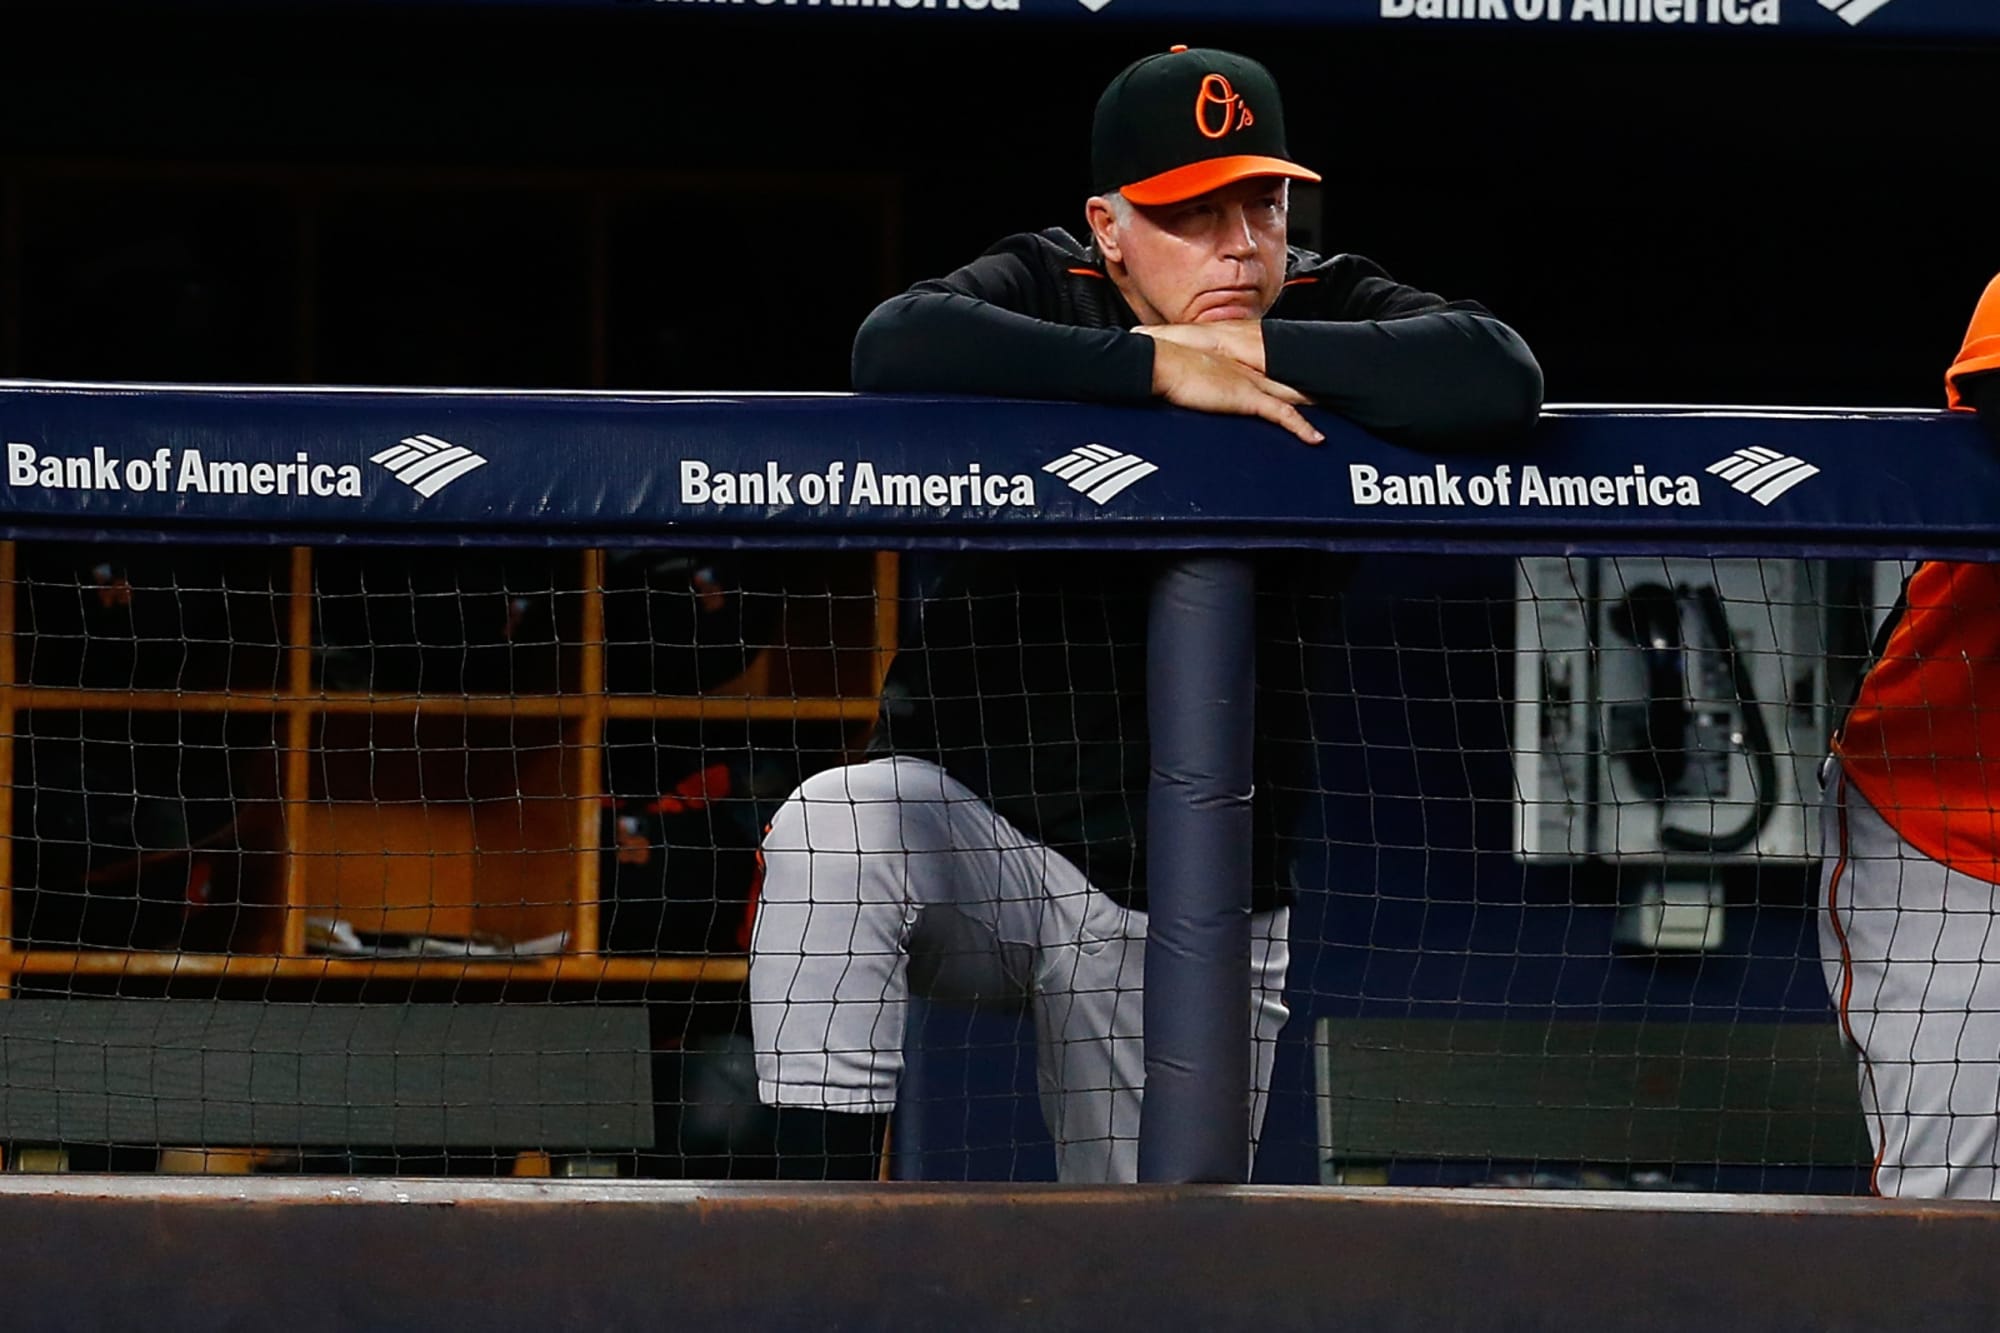 MLB Rumors: Who should replace Buck Showalter as Orioles manager?